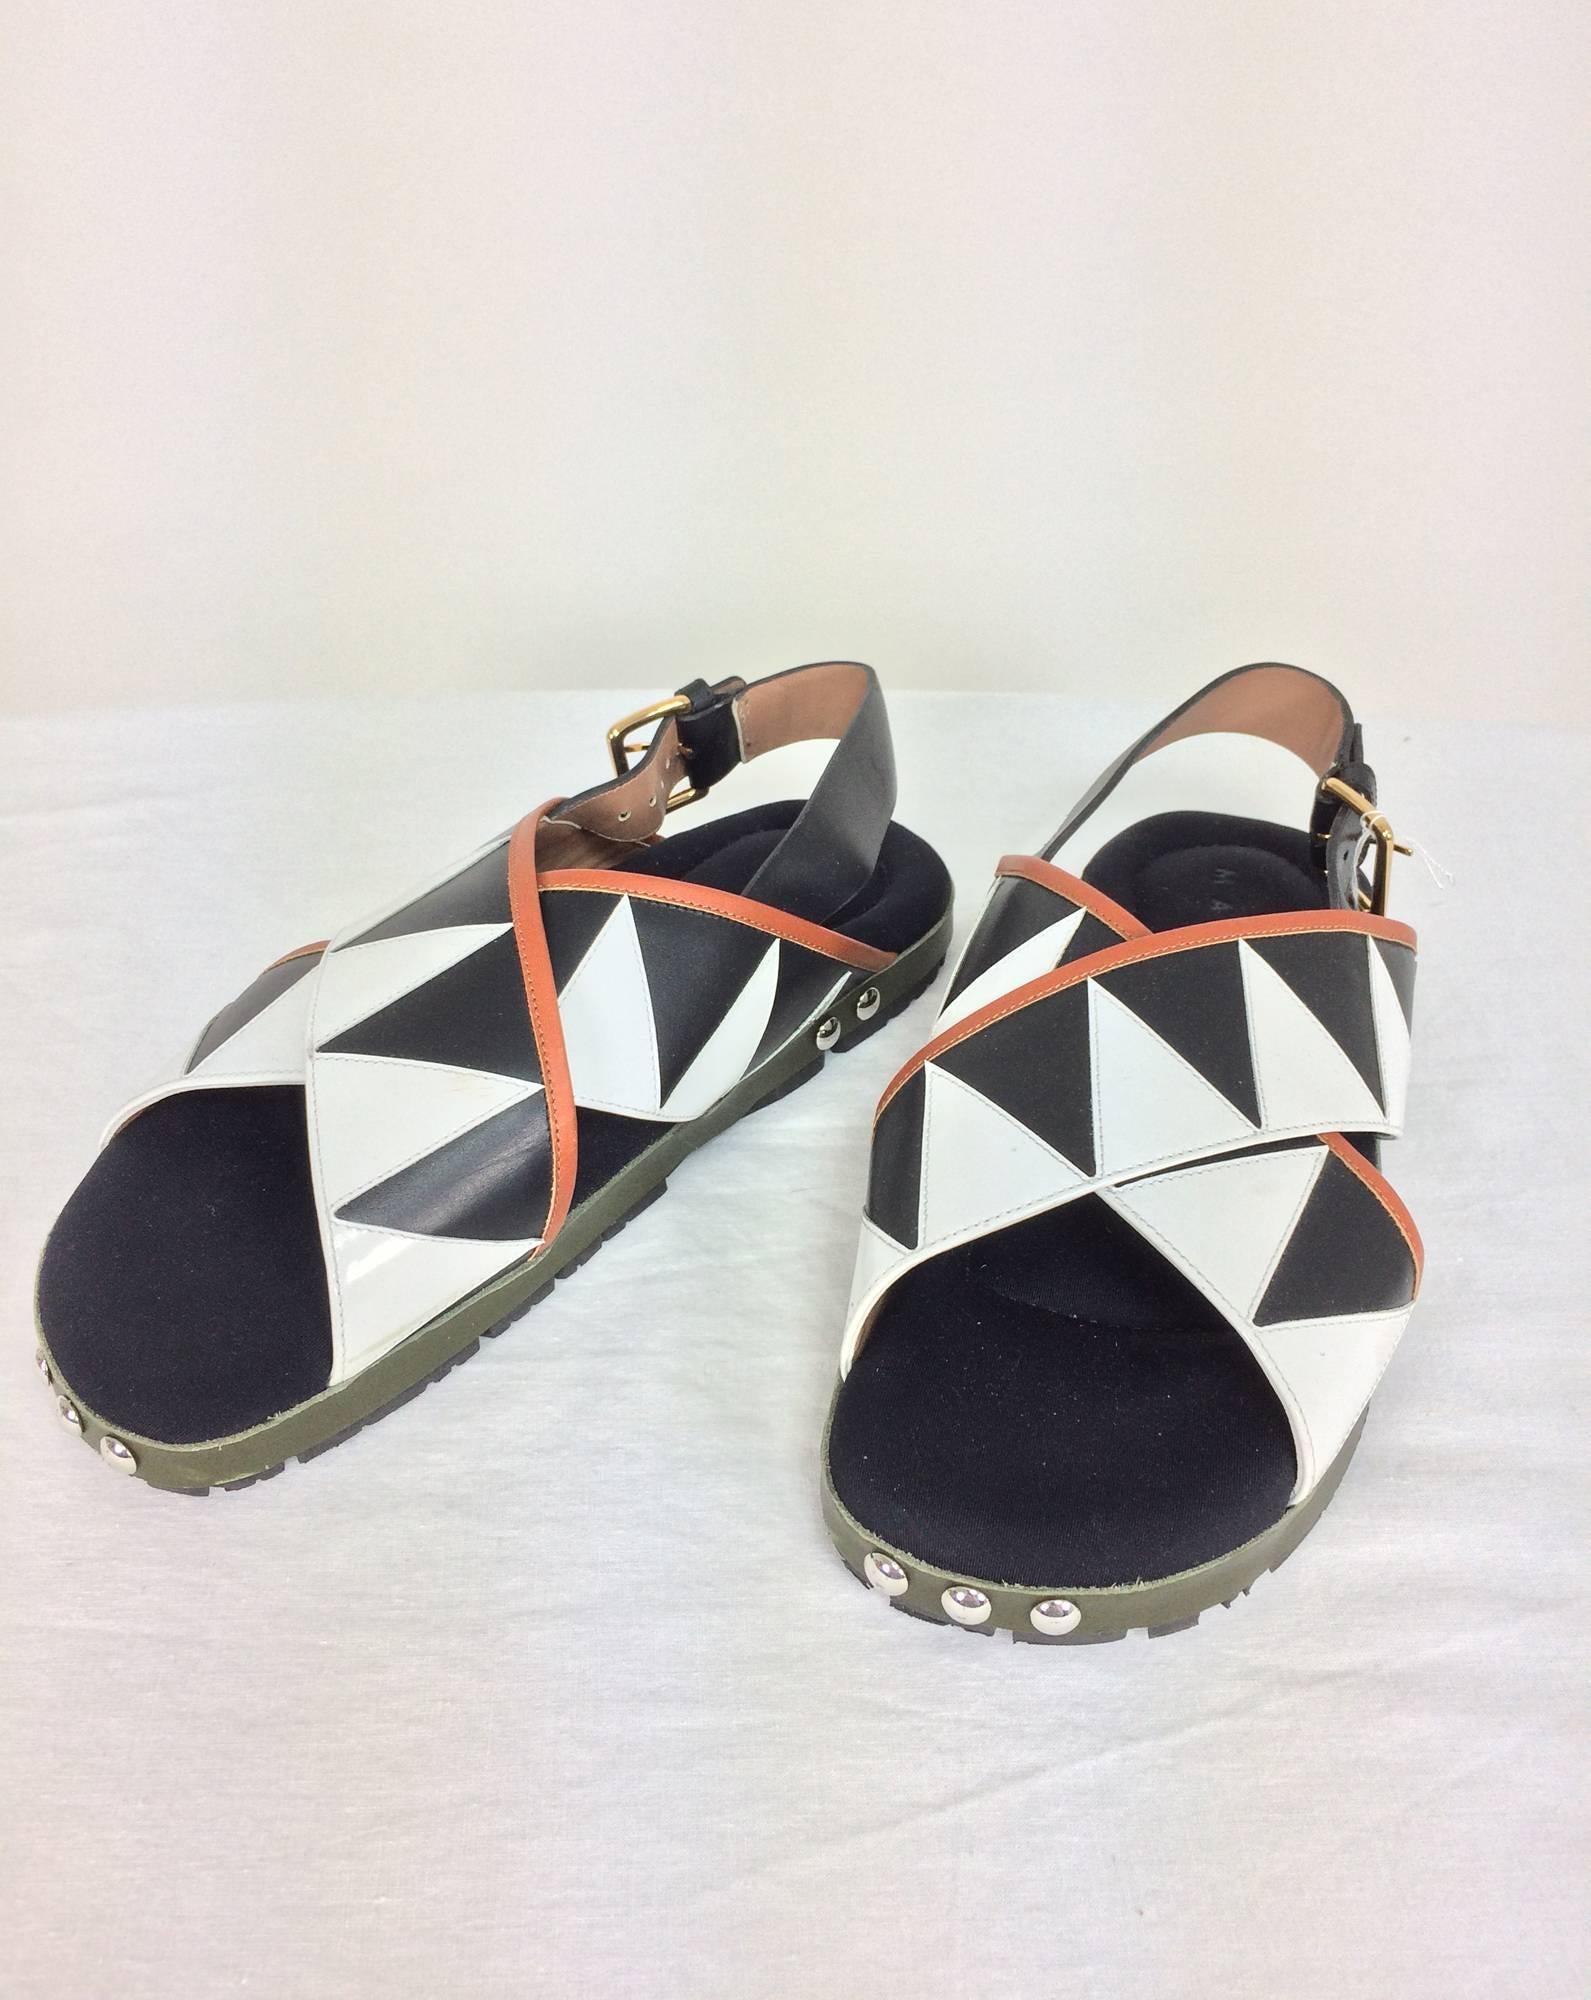 Marni geometric leather criss cross sandals 39M...White patent leather with black leather...Coral leather trim...Chunky rubber soles...Leather buckle straps...Silver studs...In Excellent pre owned condition.